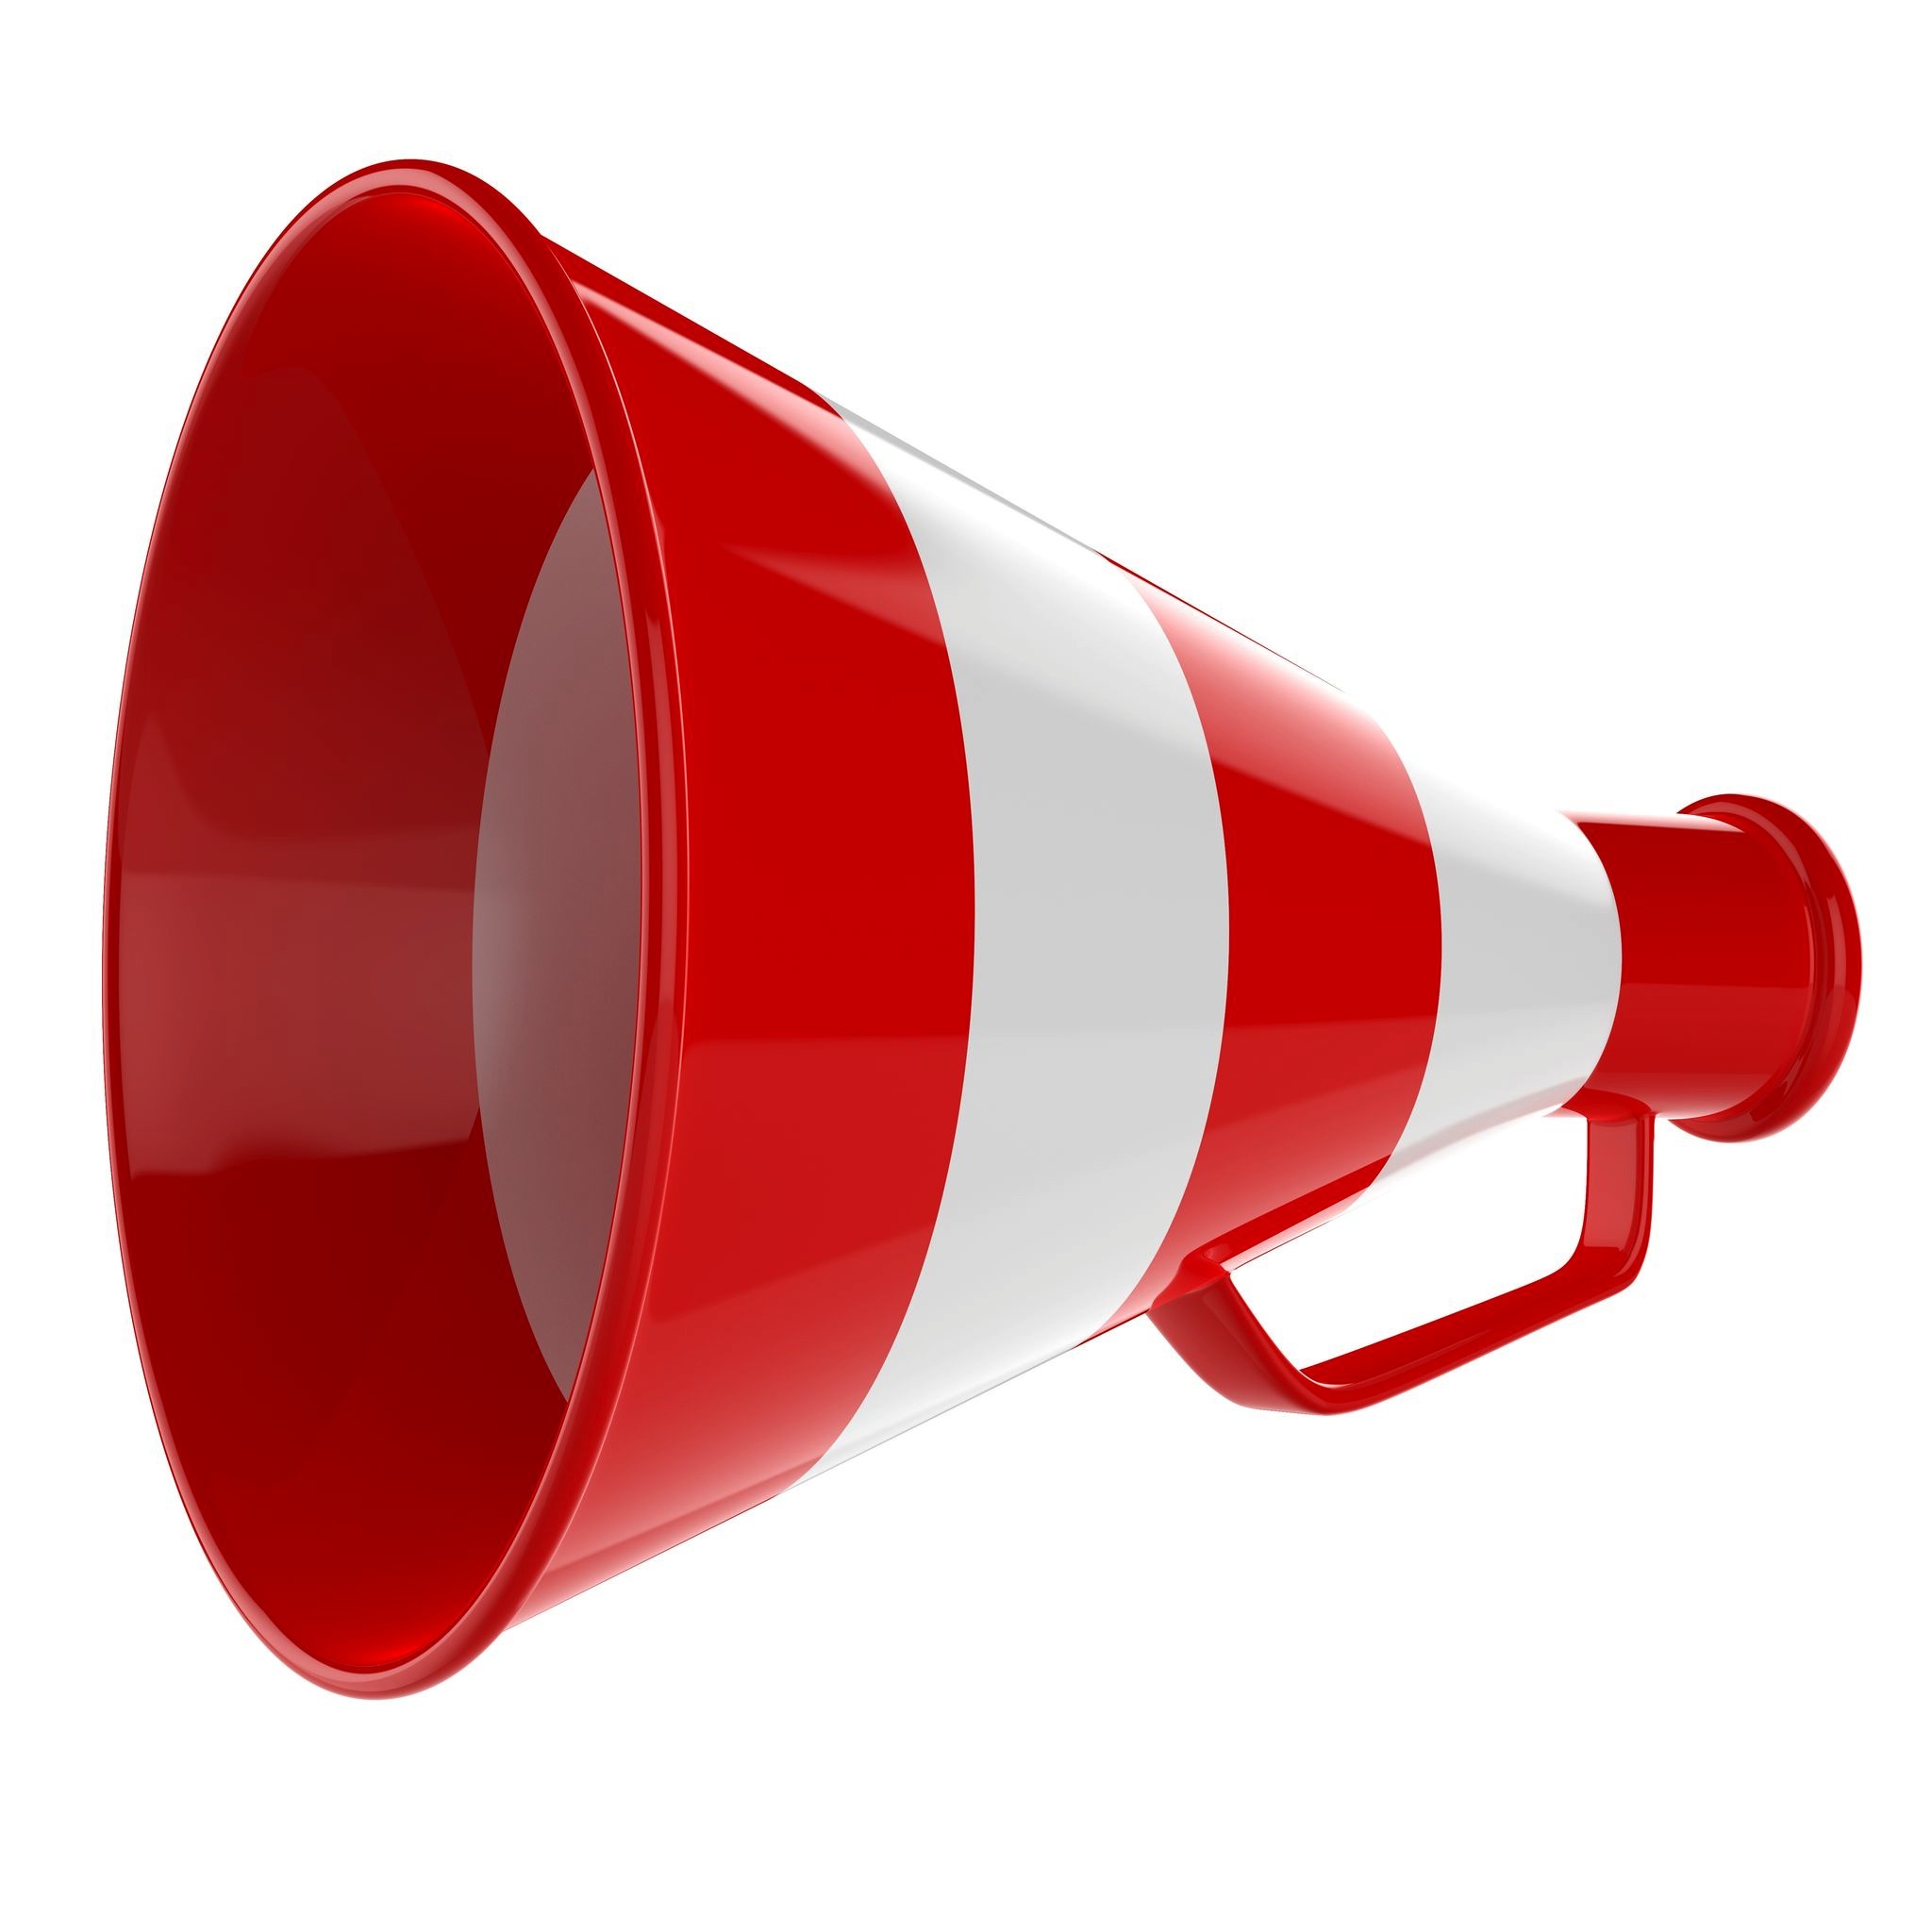 Red Cheering Megaphone Clipart Clipart Image 1 - Megaphone, Transparent background PNG HD thumbnail